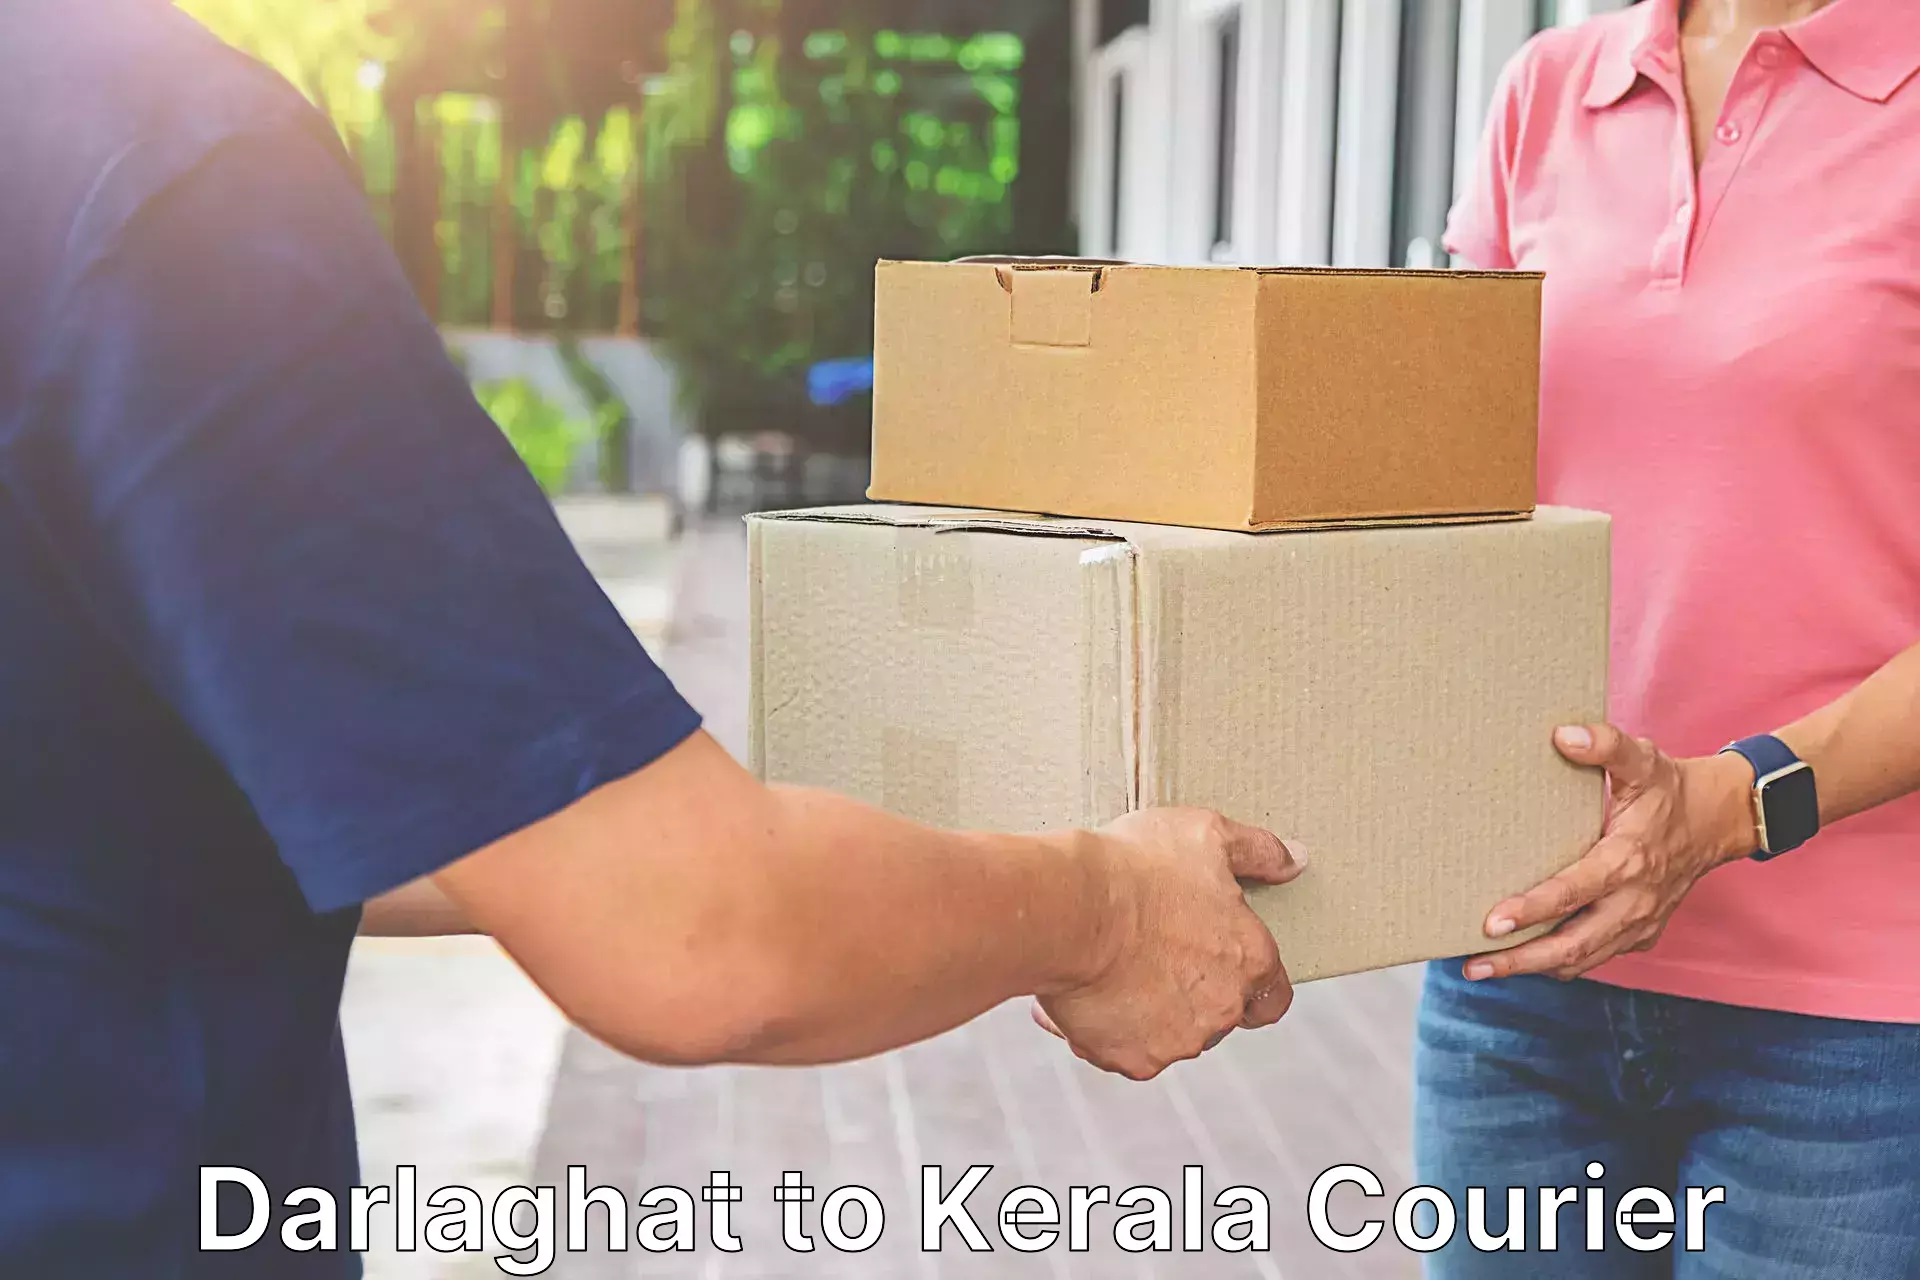 24-hour courier service Darlaghat to Cochin Port Kochi